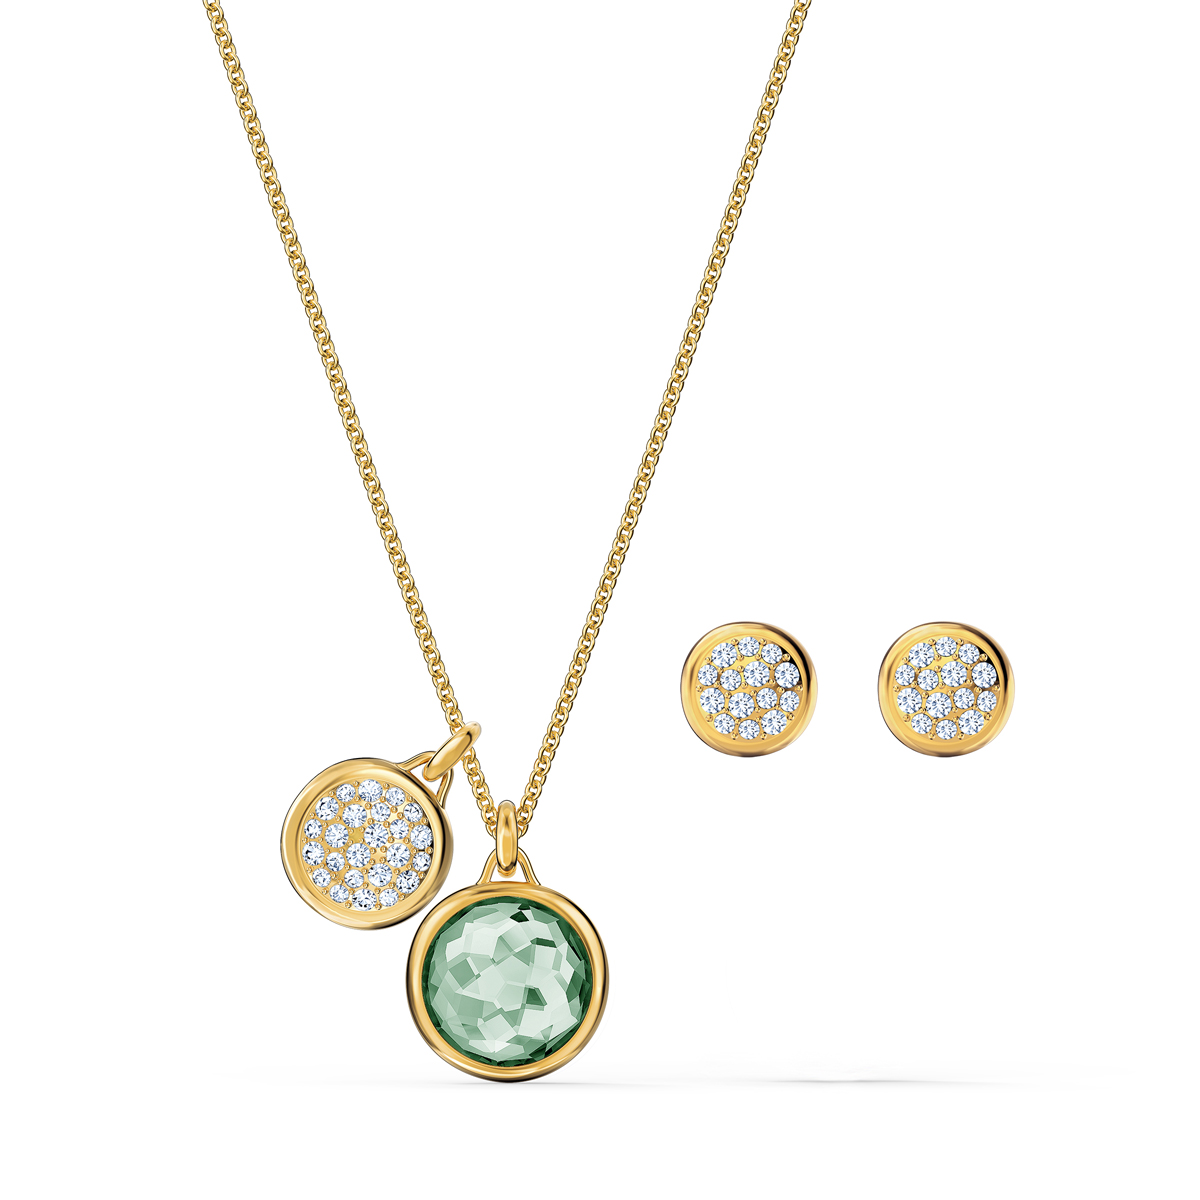 Swarovski Tahlia Necklace and Earrings Set, Green, Gold Tone Plated